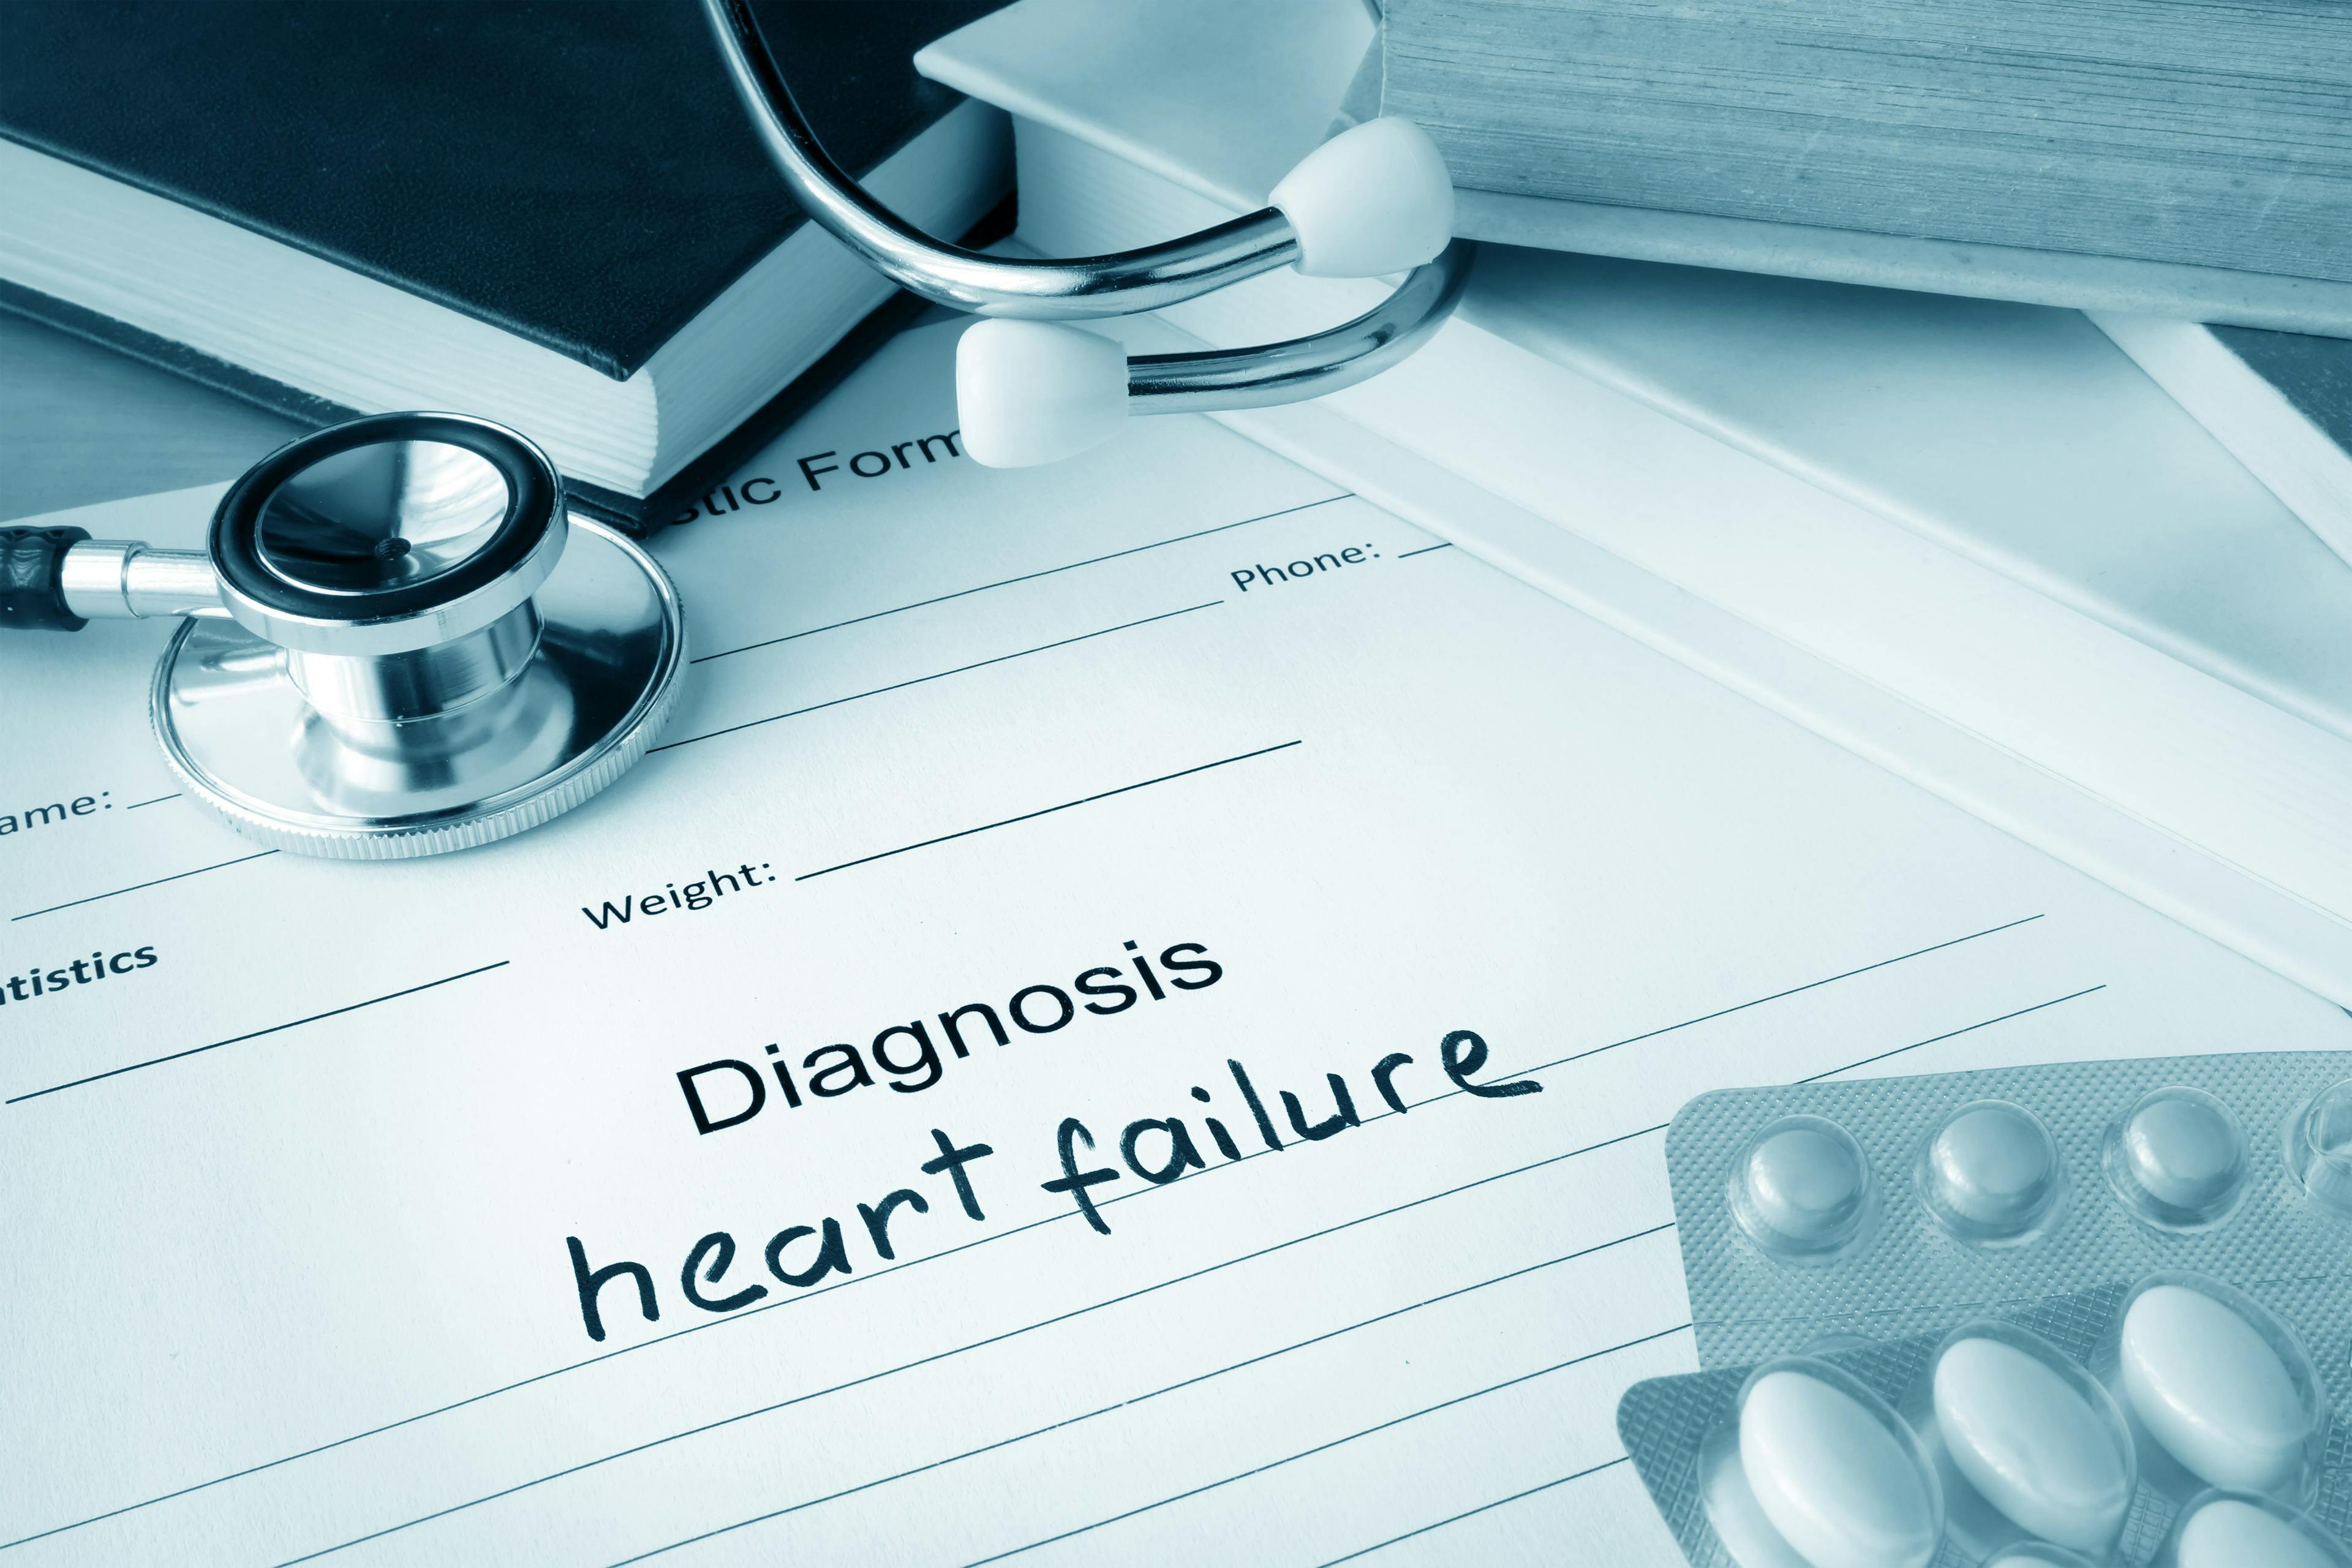 Stock imagery depicting the word "Heart Failure" written on a doctor's note pad surrounded by medical imagery | Credit: Fotolia